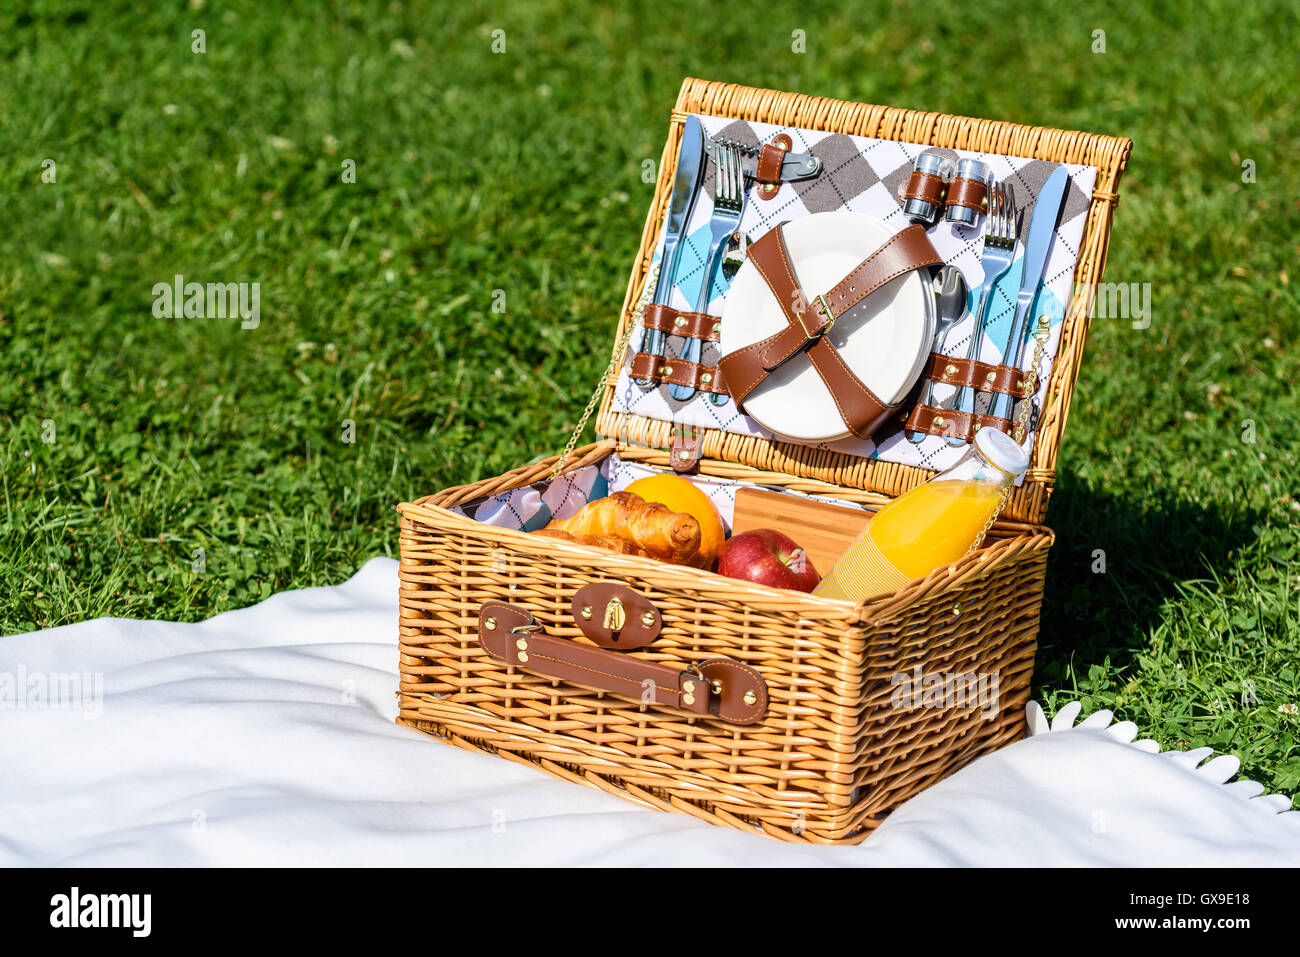 Picnic Basket Food On White Blanket With Pillows In Summer Stock Photo